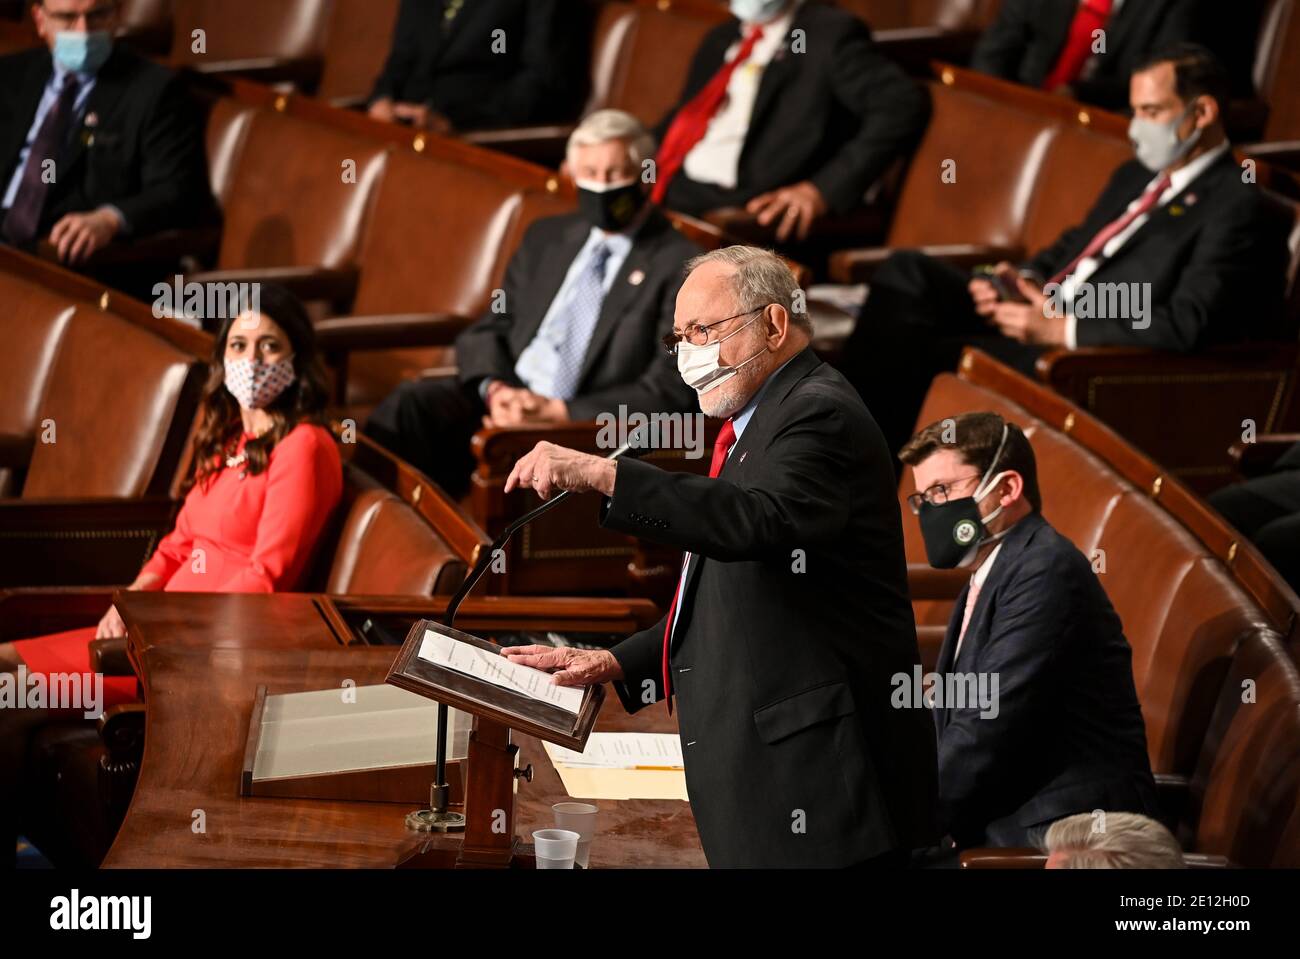 Washington, USA. 03rd Jan, 2021. Washington, DC - January 03: Rep. Don Young (R-Alaska), dean of the House, addresses House Speaker Nancy Pelosi (D-Calif.) on the opening day of the 117th Congress at the U.S. Capitol in Washington, DC on January 03, 2021. (Photo by Photo by Bill O'Leary/Pool/Sipa USA) Credit: Sipa USA/Alamy Live News Stock Photo